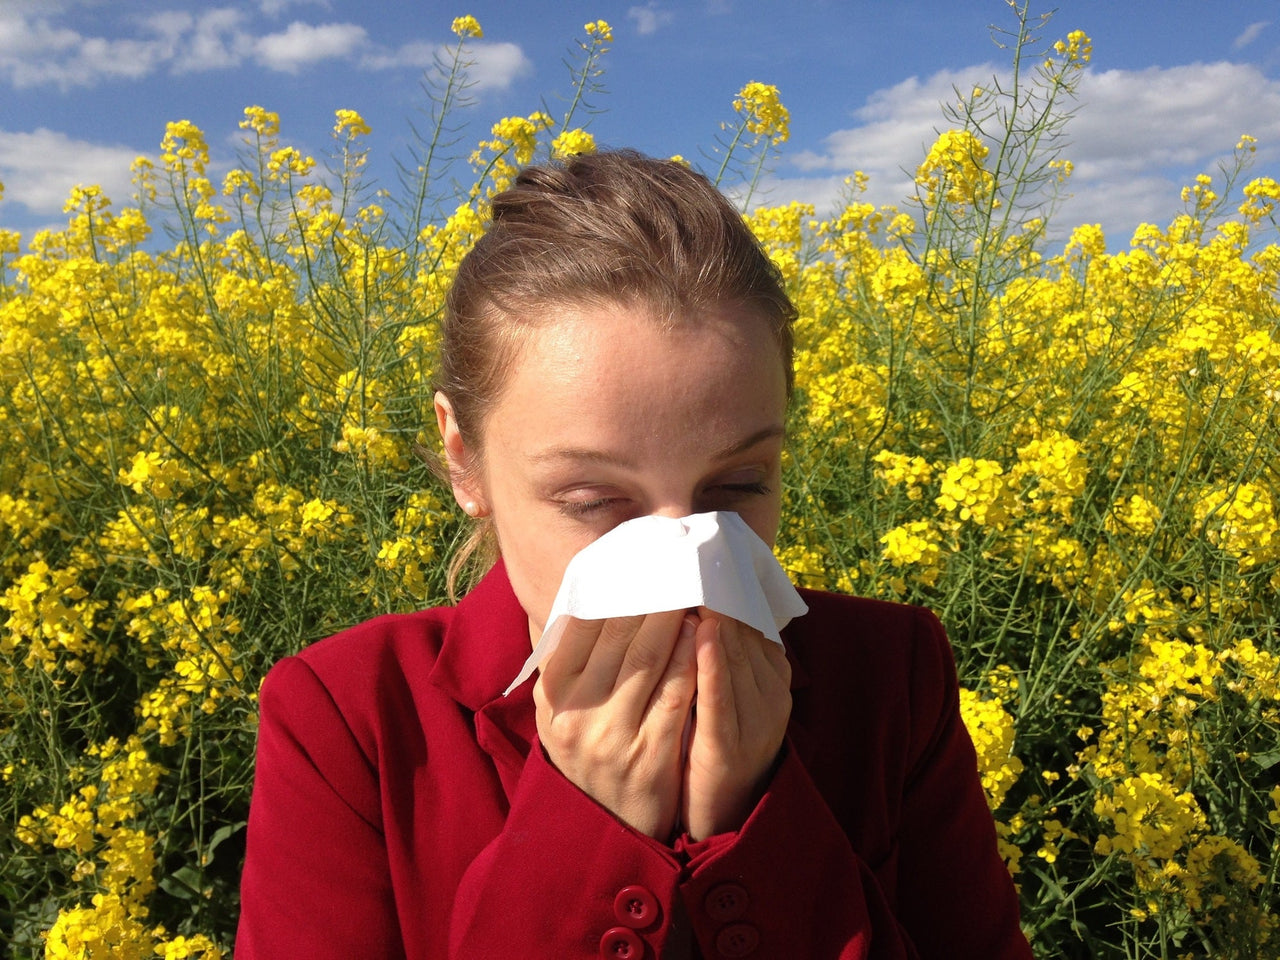 7 Effective Tips for Sleeping With Fall Allergies